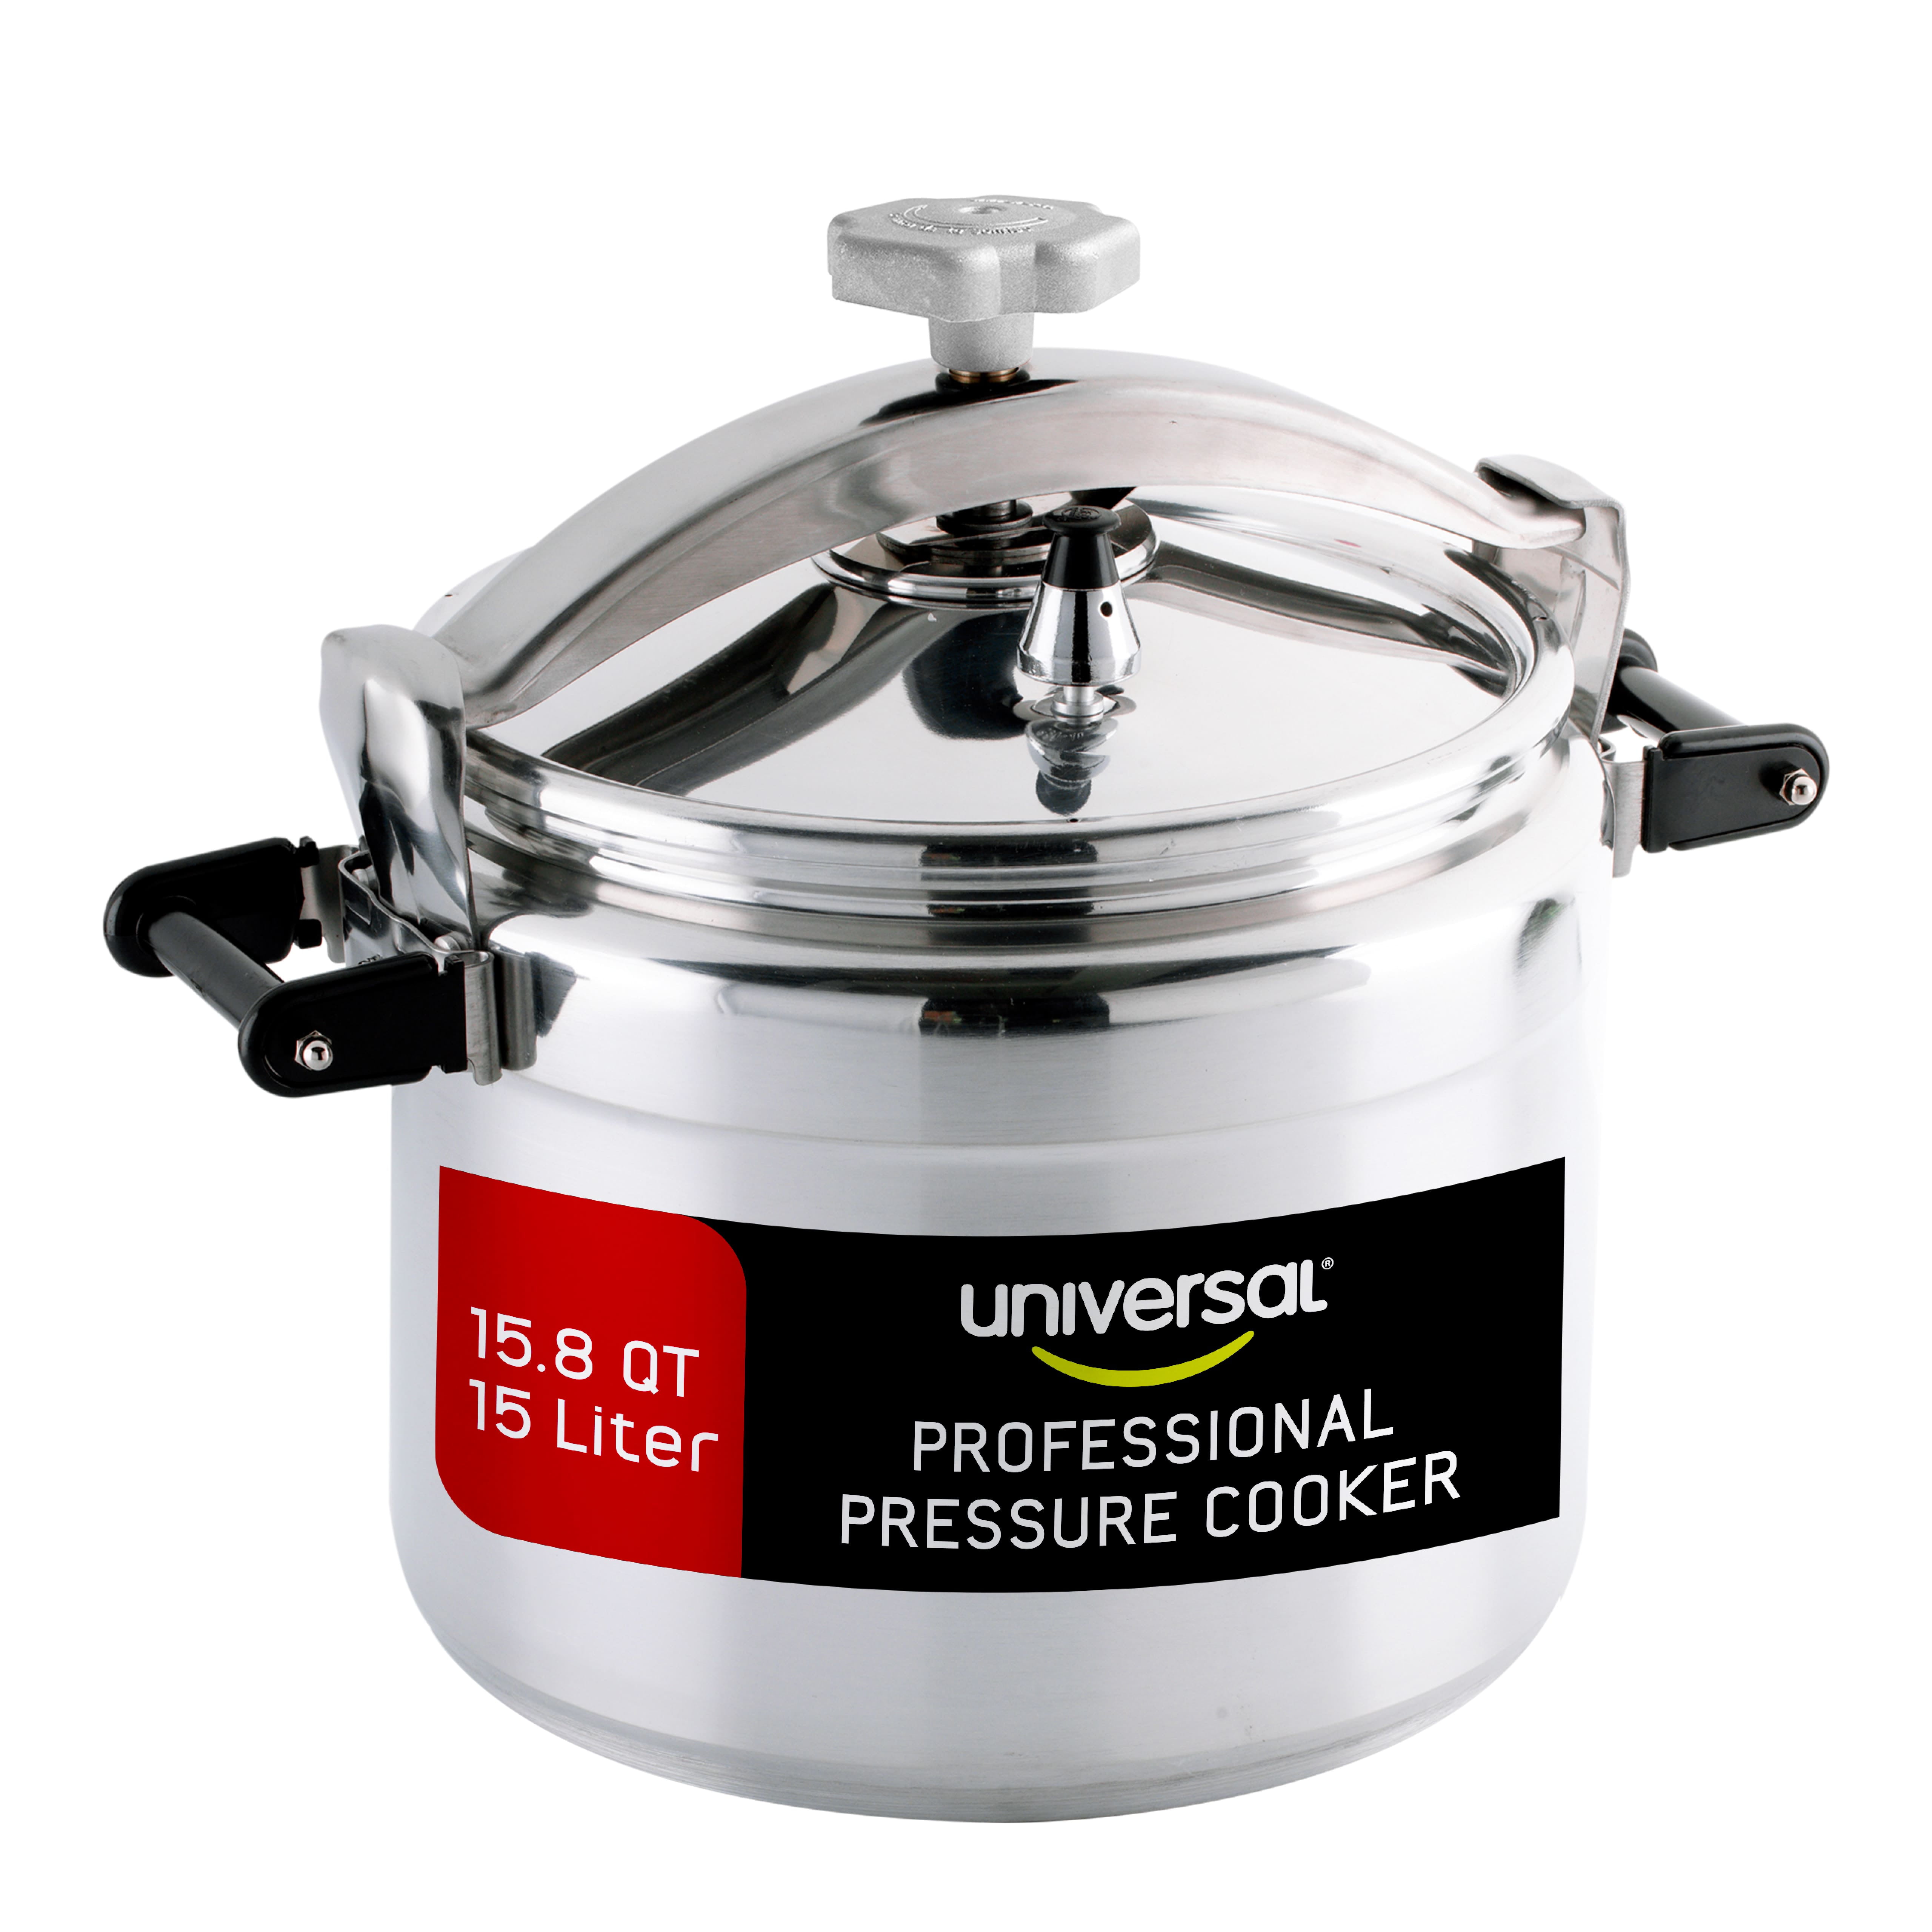 Universal 26Qt / 25L Professional Pressure Cooker, Sturdy, Heavy-Duty Aluminum Construction with Multiple Safety Systems